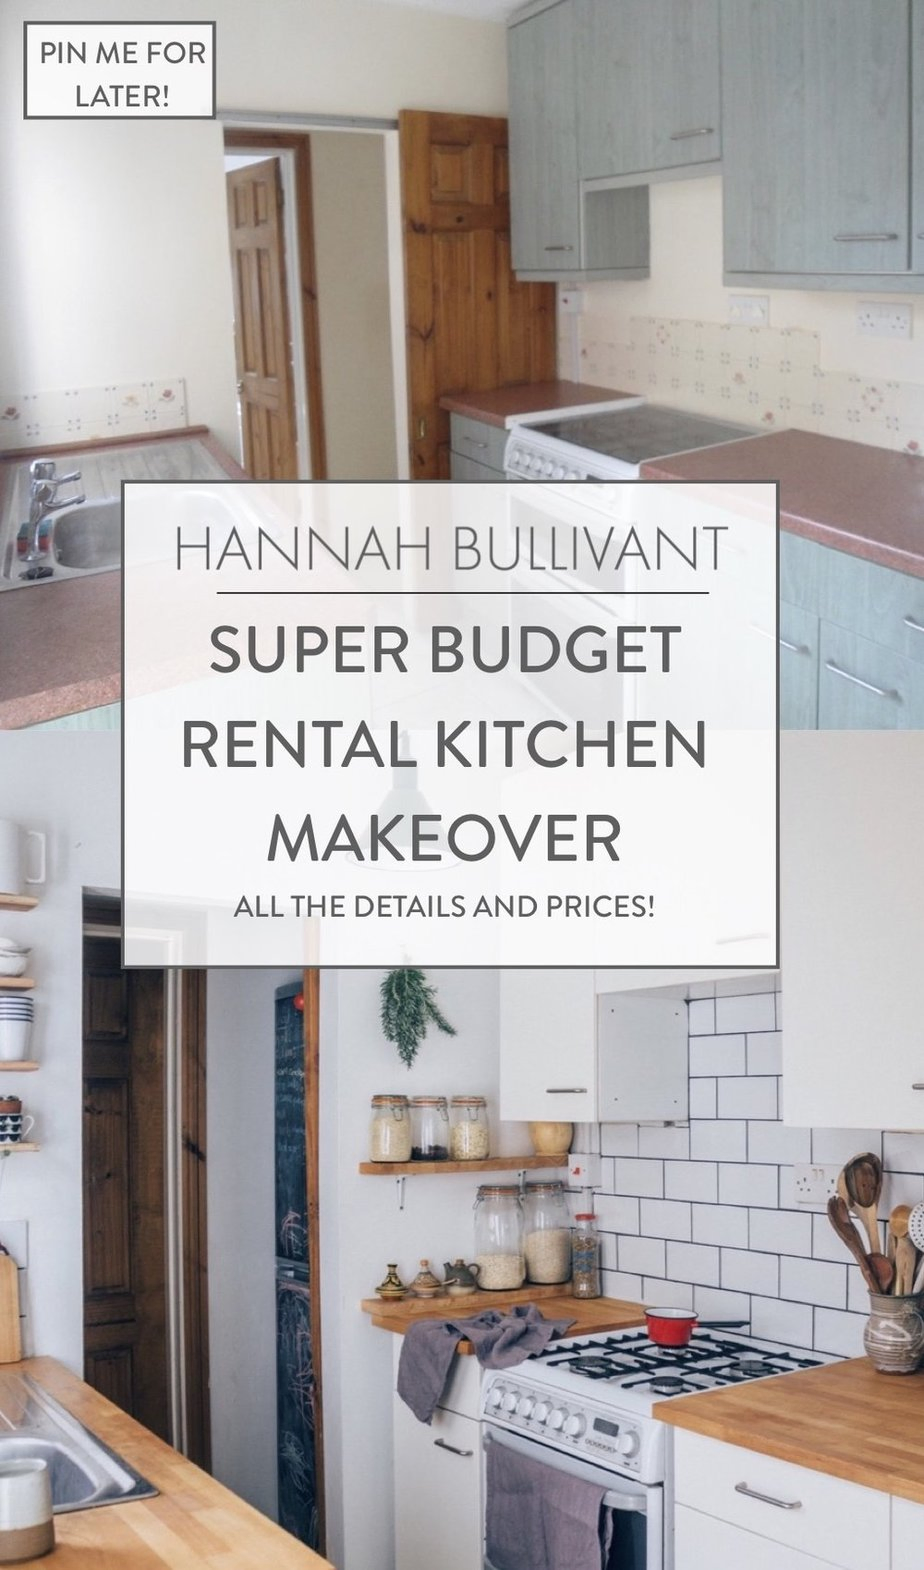 10. Try this SUPER BUDGET RENTAL KITCHEN MAKEOVER by simphome.com